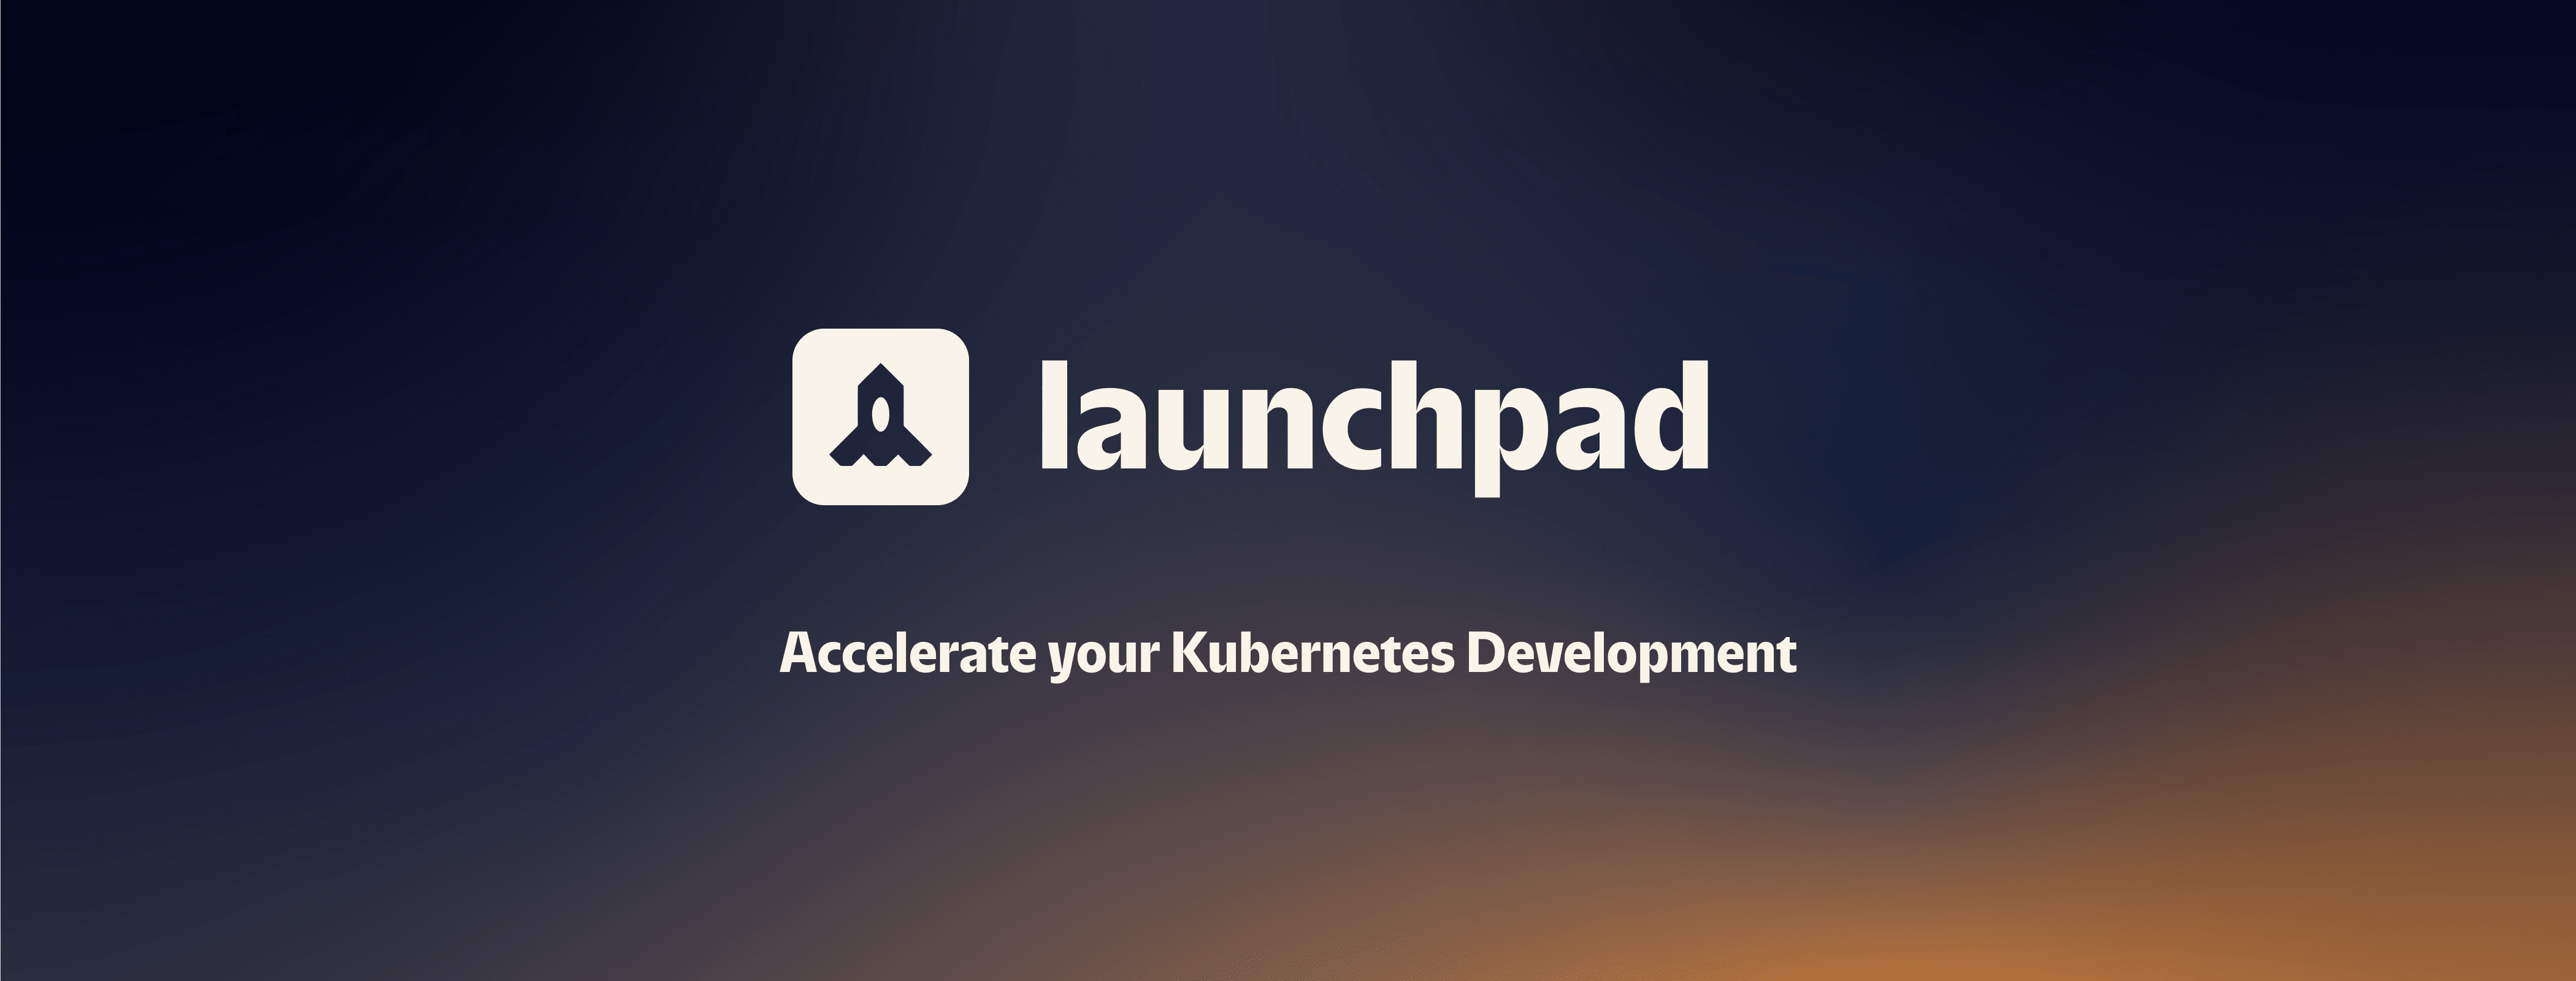 Announcing Launchpad